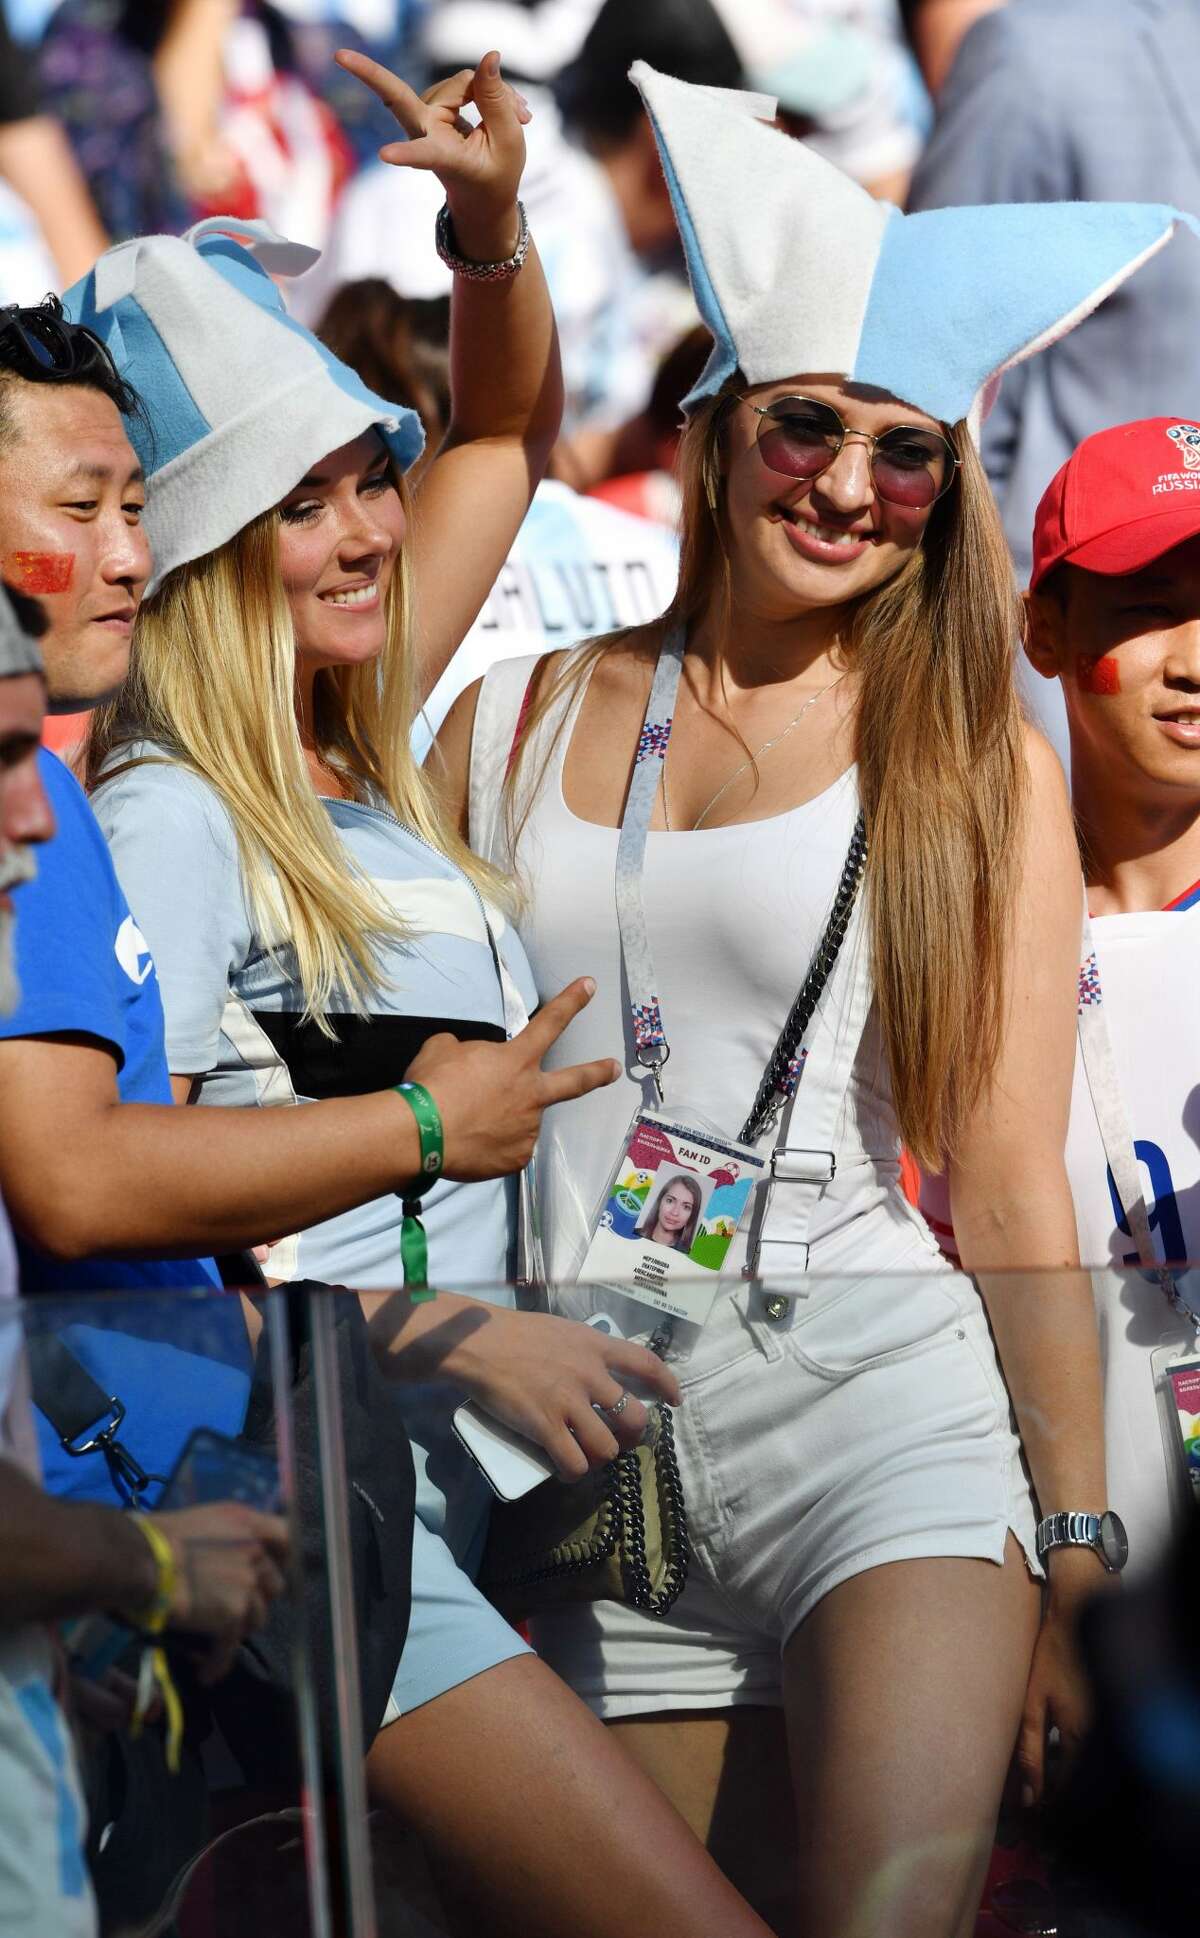 Argentina fans smile during the Russia 2018 World Cup Group D football match between Argentina and Iceland at the Spartak Stadium in Moscow on June 16, 2018. (Photo by Mladen ANTONOV / AFP) / RESTRICTED TO EDITORIAL USE - NO MOBILE PUSH ALERTS/DOWNLOADS (Photo credit should read MLADEN ANTONOV/AFP/Getty Images)